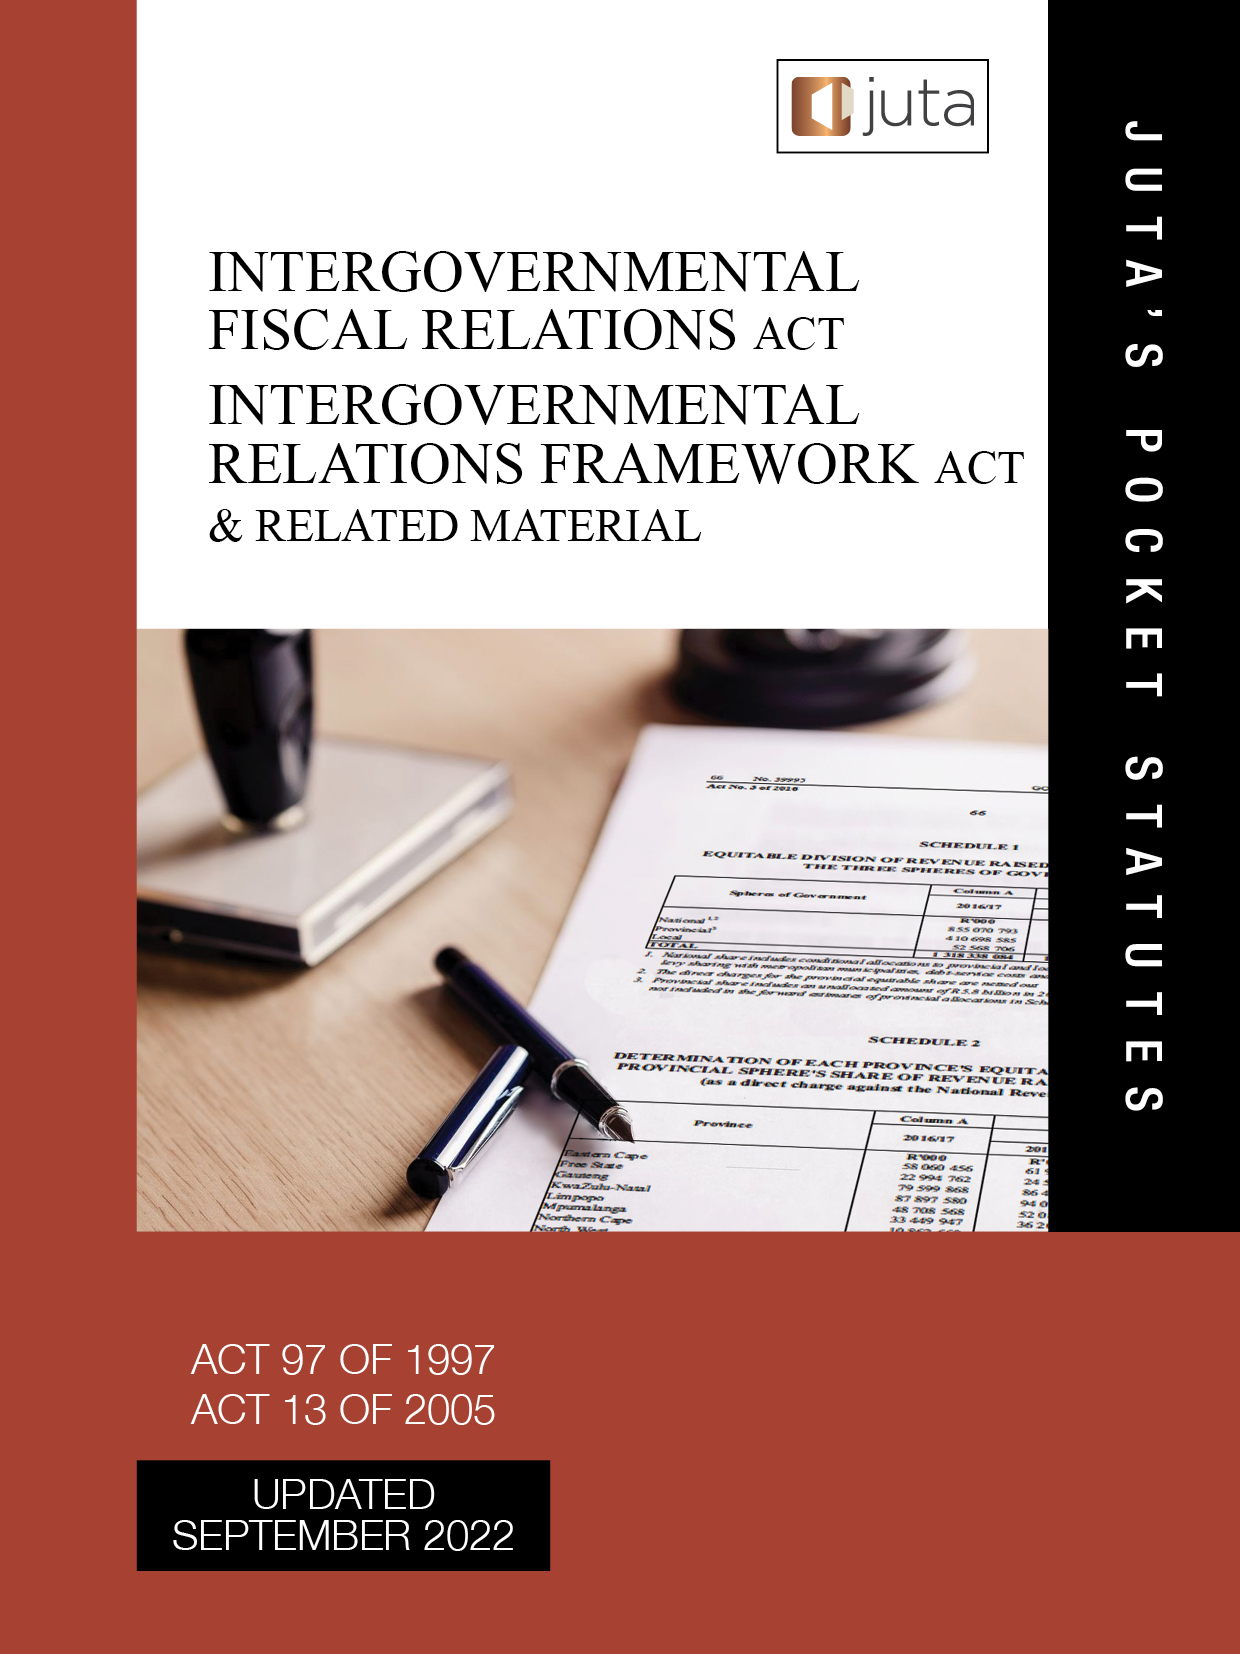 Intergovernmental Fiscal Relations Act 97 of 1997; Intergovernmental Relations Framework Act & Related Material 13 of 2005